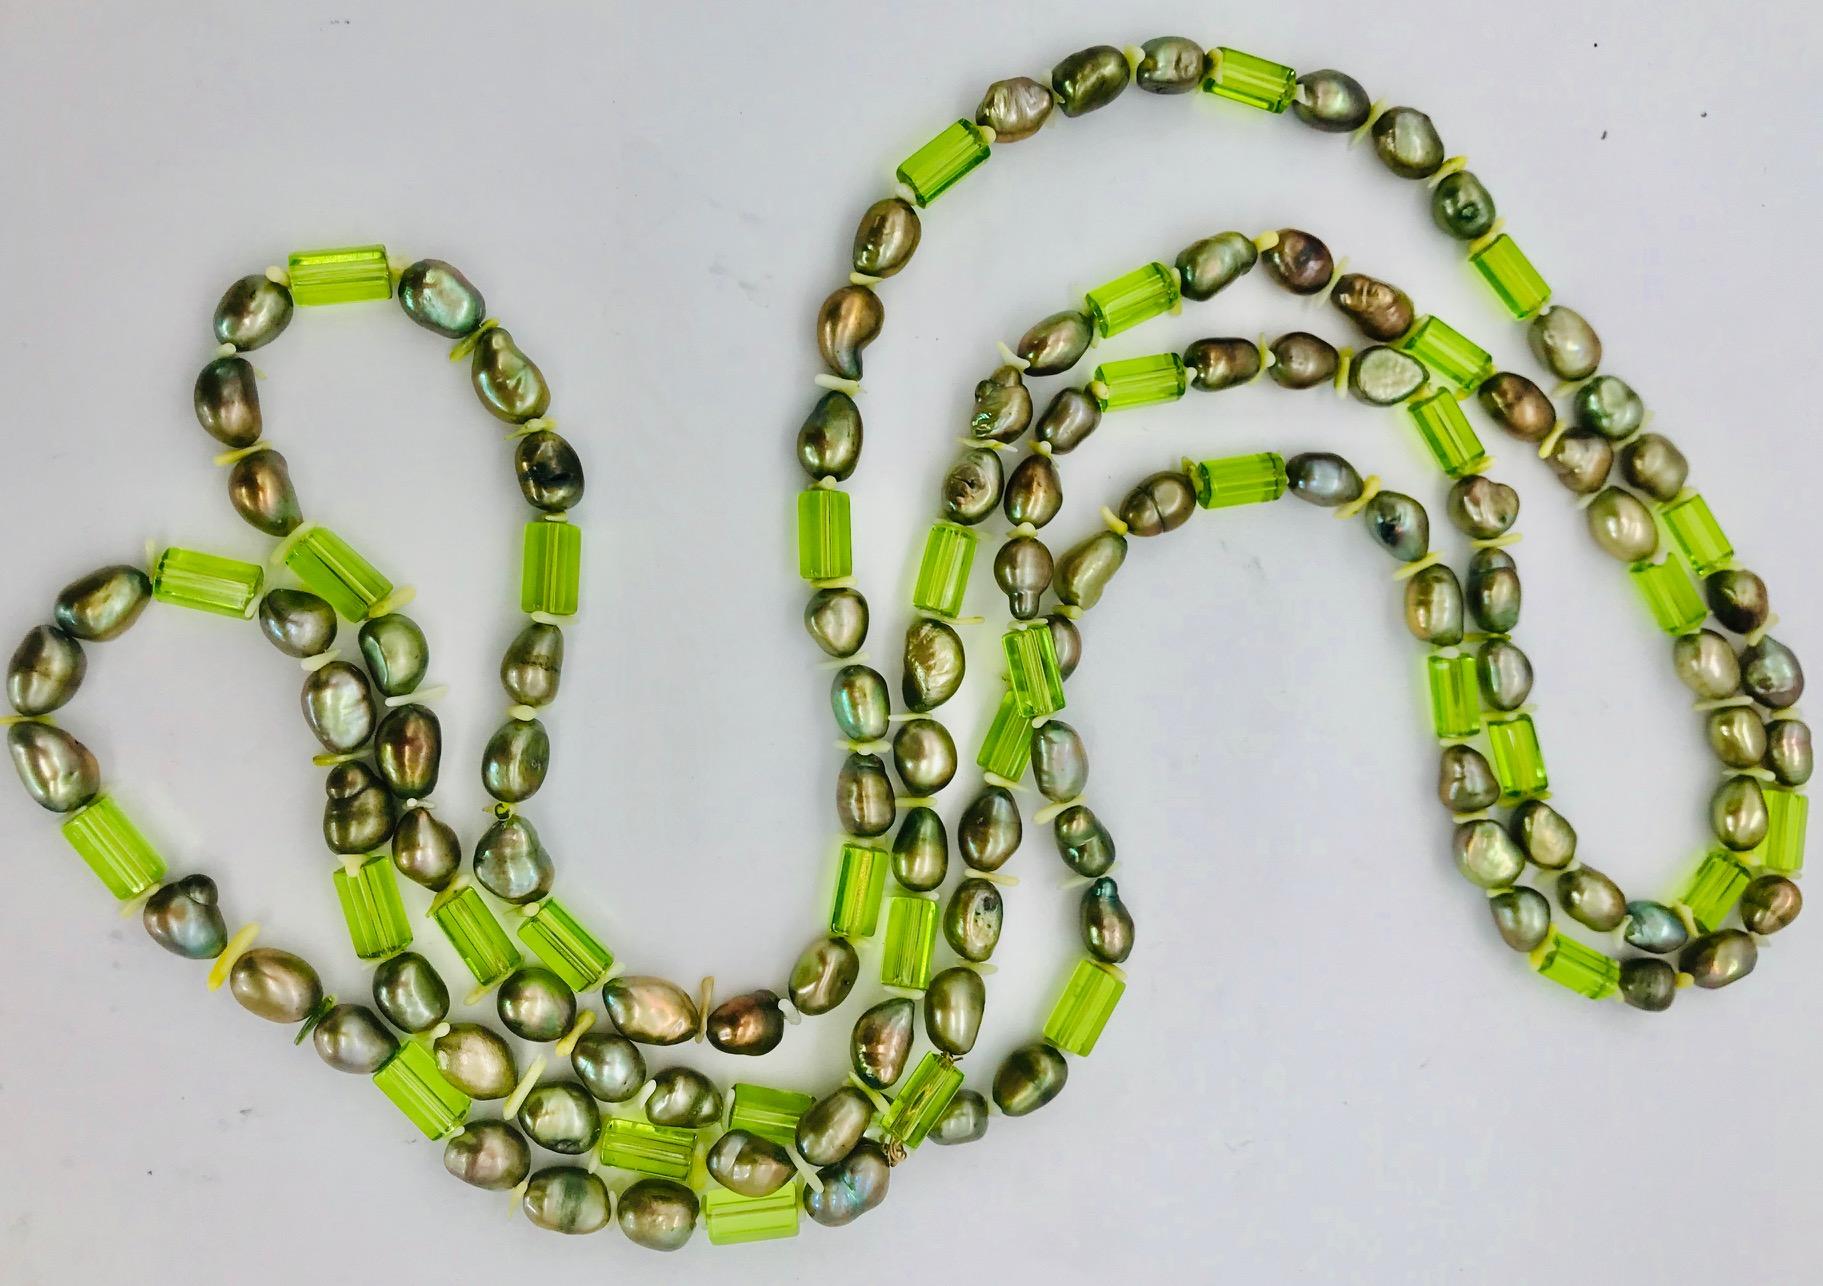 Bead Natural green Pearls and  Peridot Stones with Silver clasp, by Sylvia Gottwald For Sale